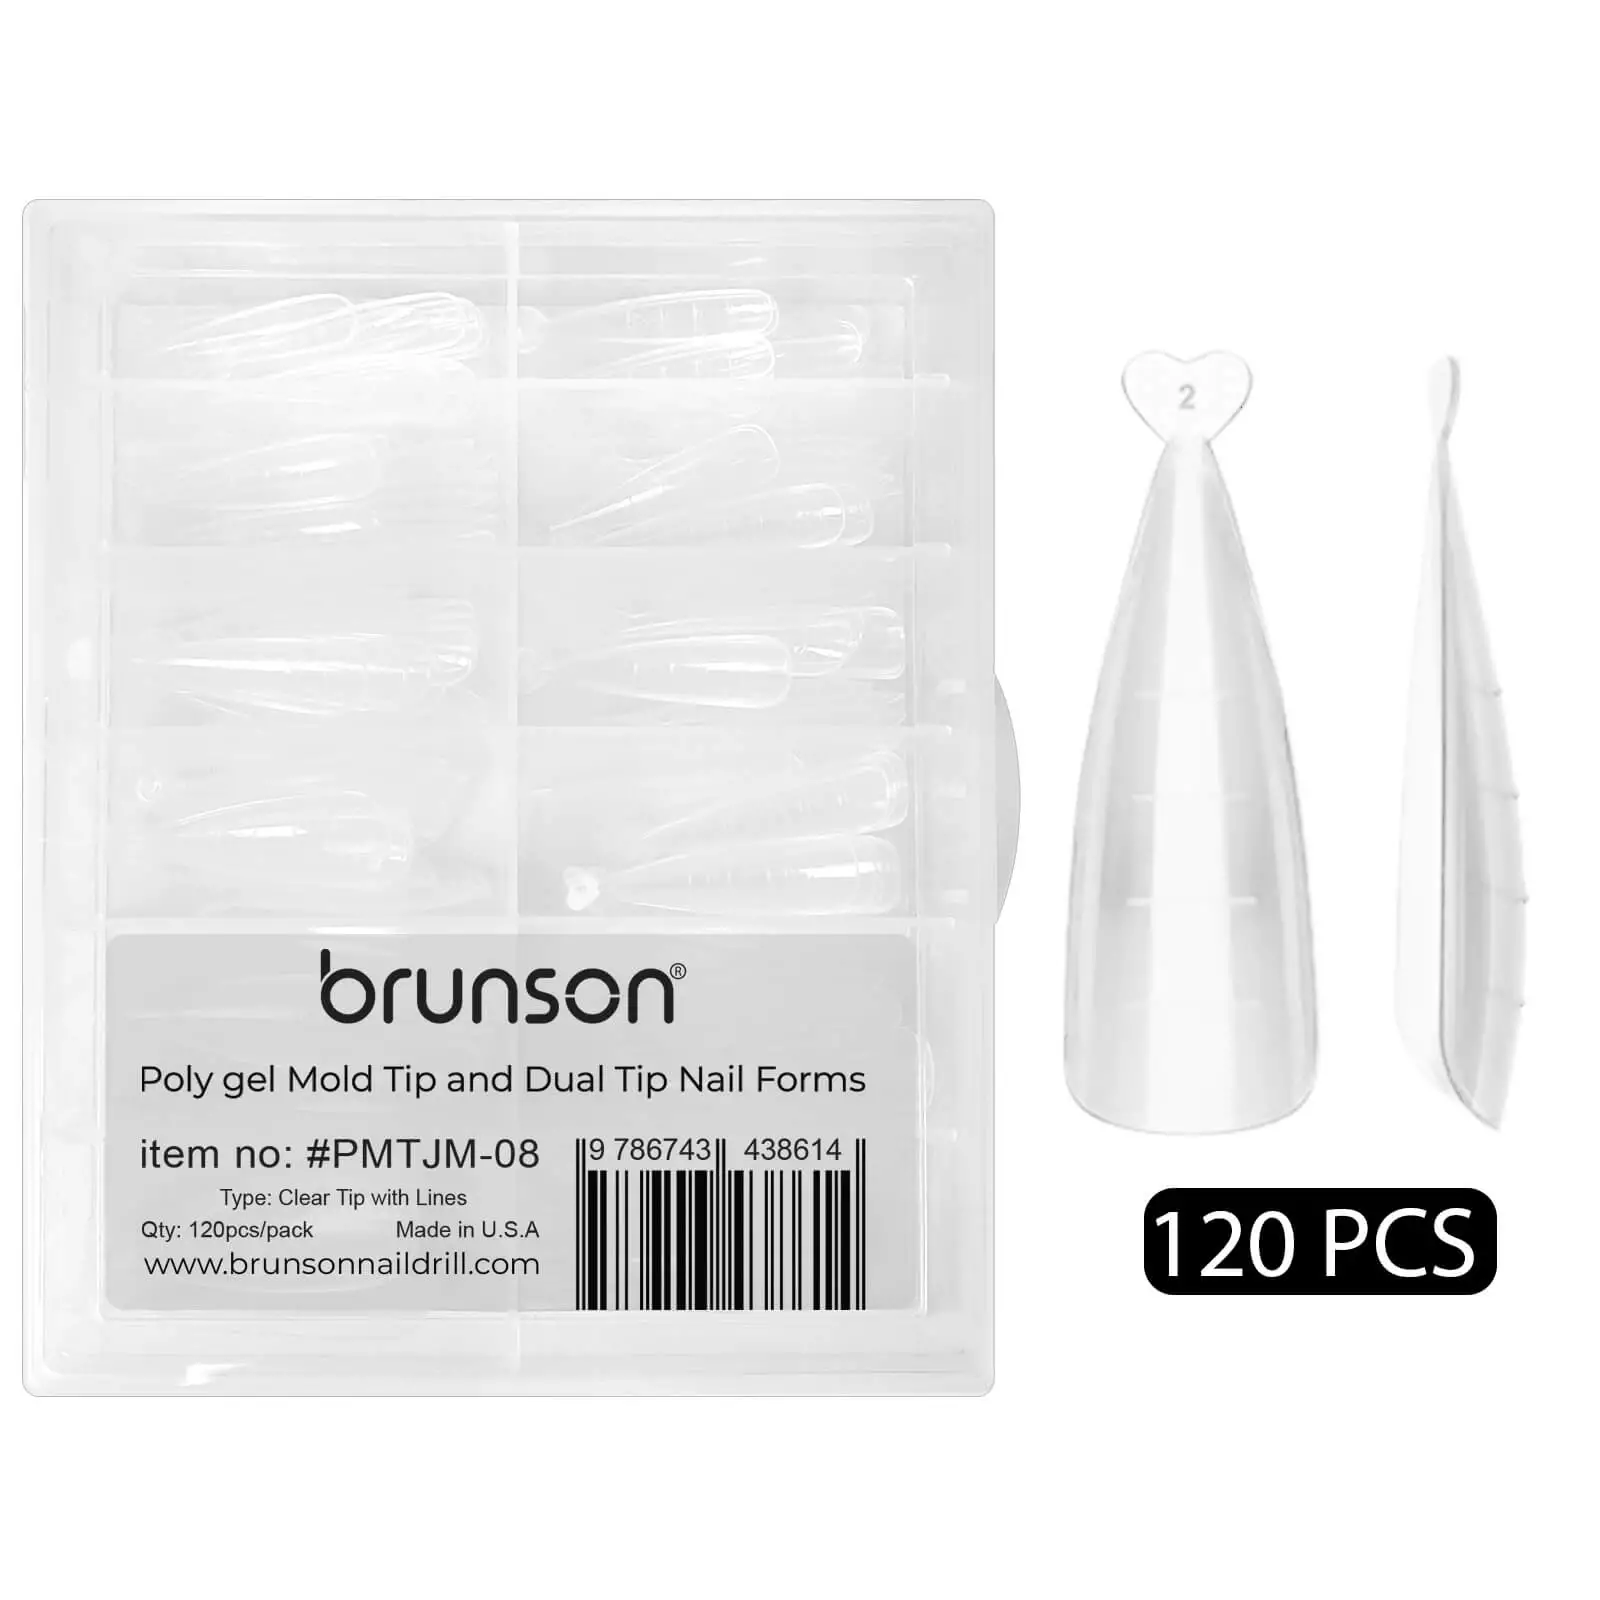 Poly-Gel-Mold-Tip-and-Dual-Tip-Nail-Forms-PMTJM-08-Brunson-1